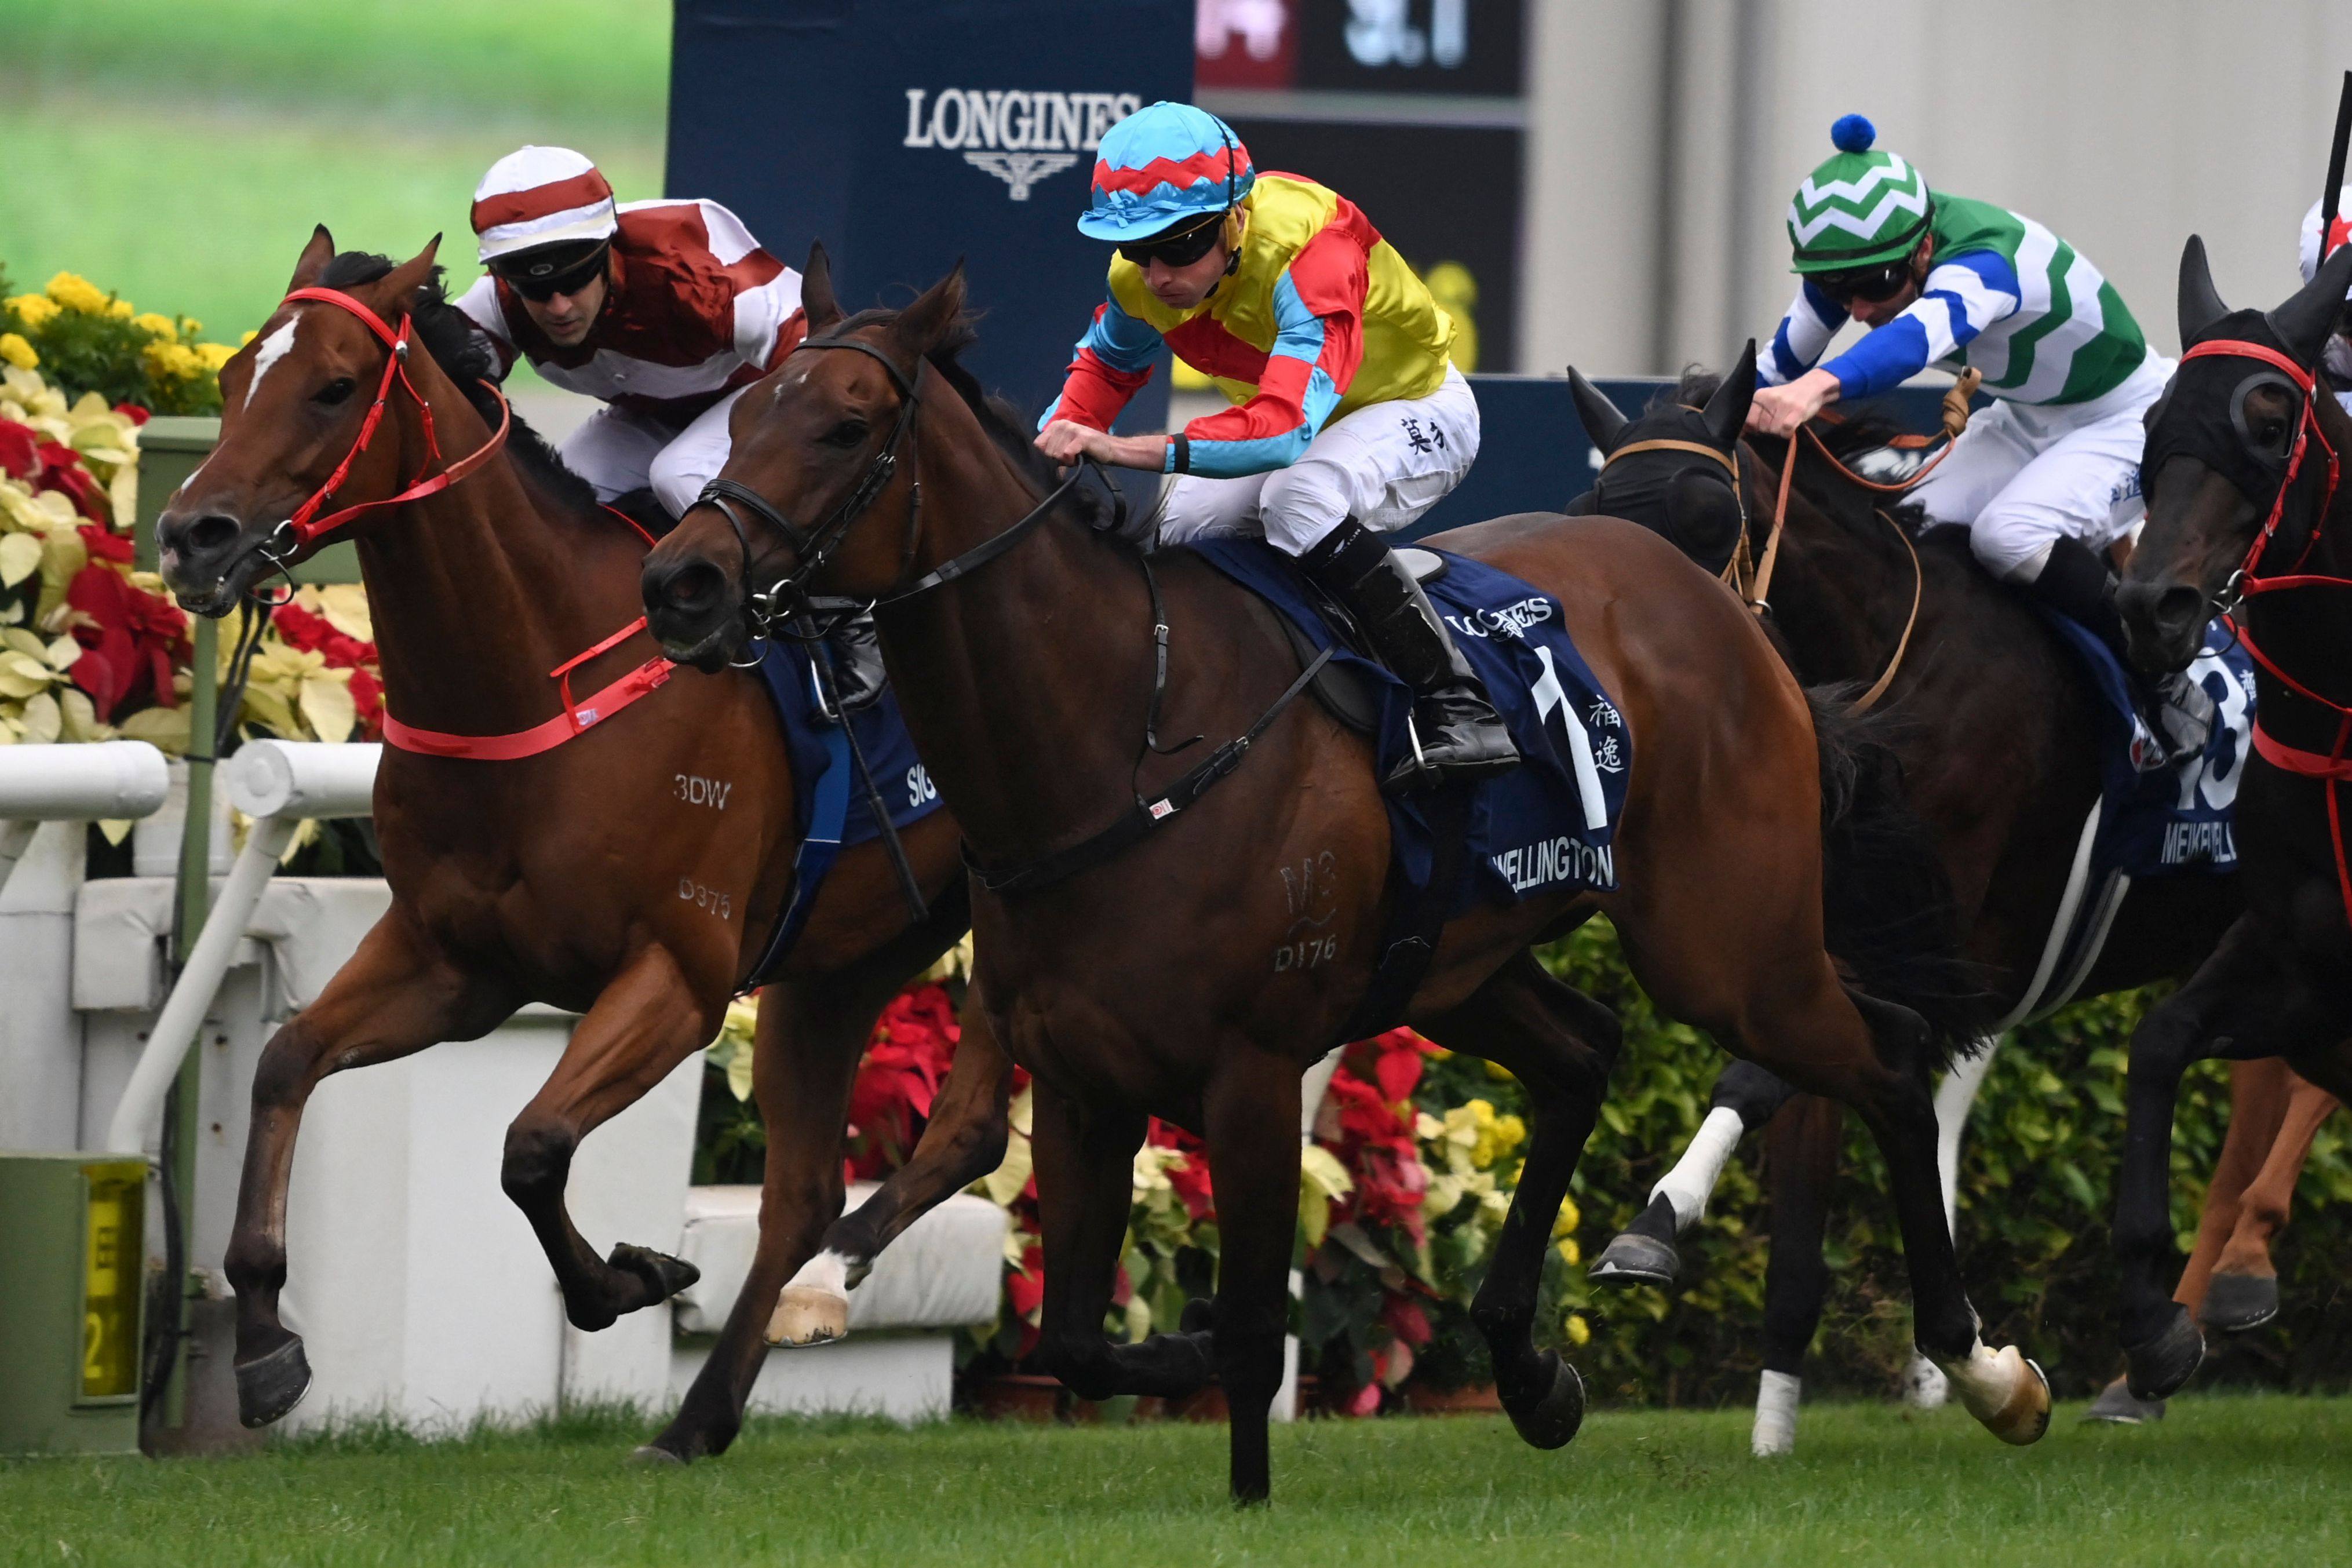 Jockeys cross the finish line in a horse race held at Sha Tin Racecourse in Hong Kong earlier this month. Photo: AFP